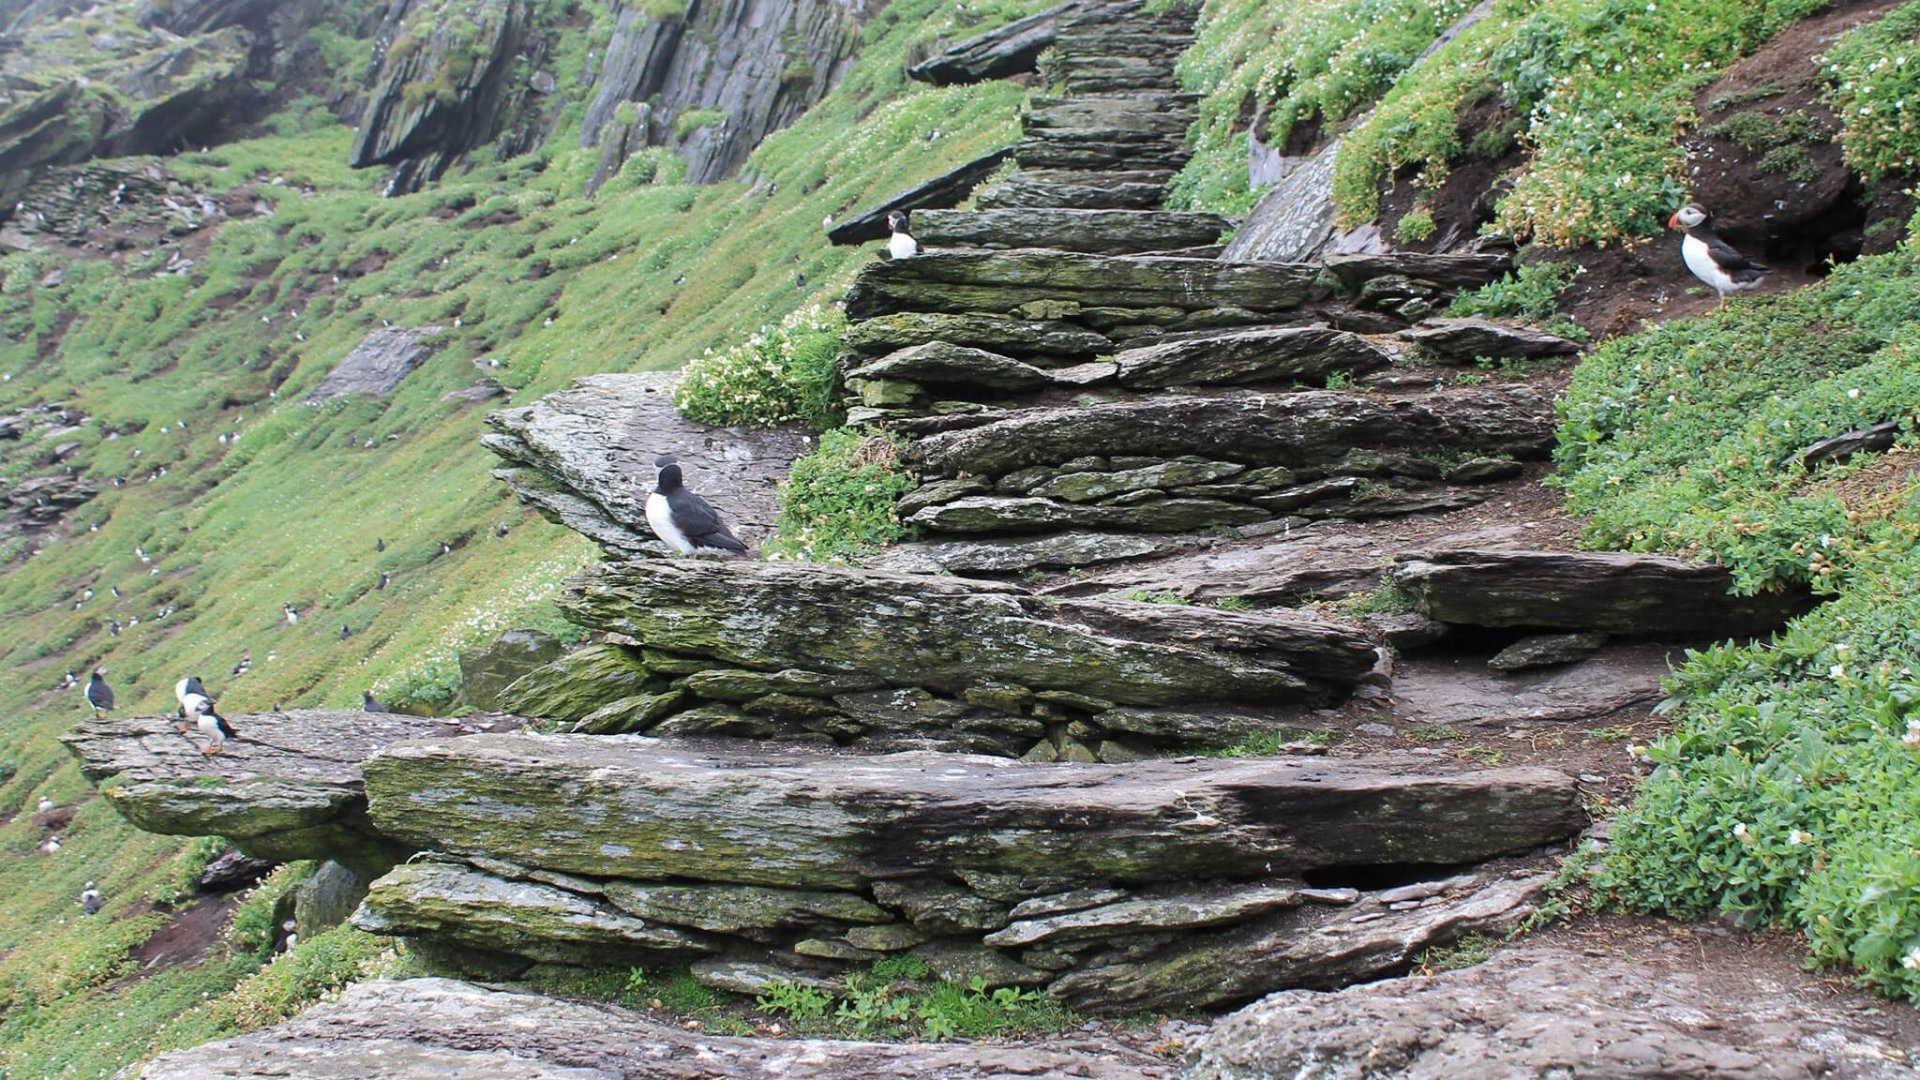 Puffins standing near the rough stone steps on Skellig Michael Island in Ireland